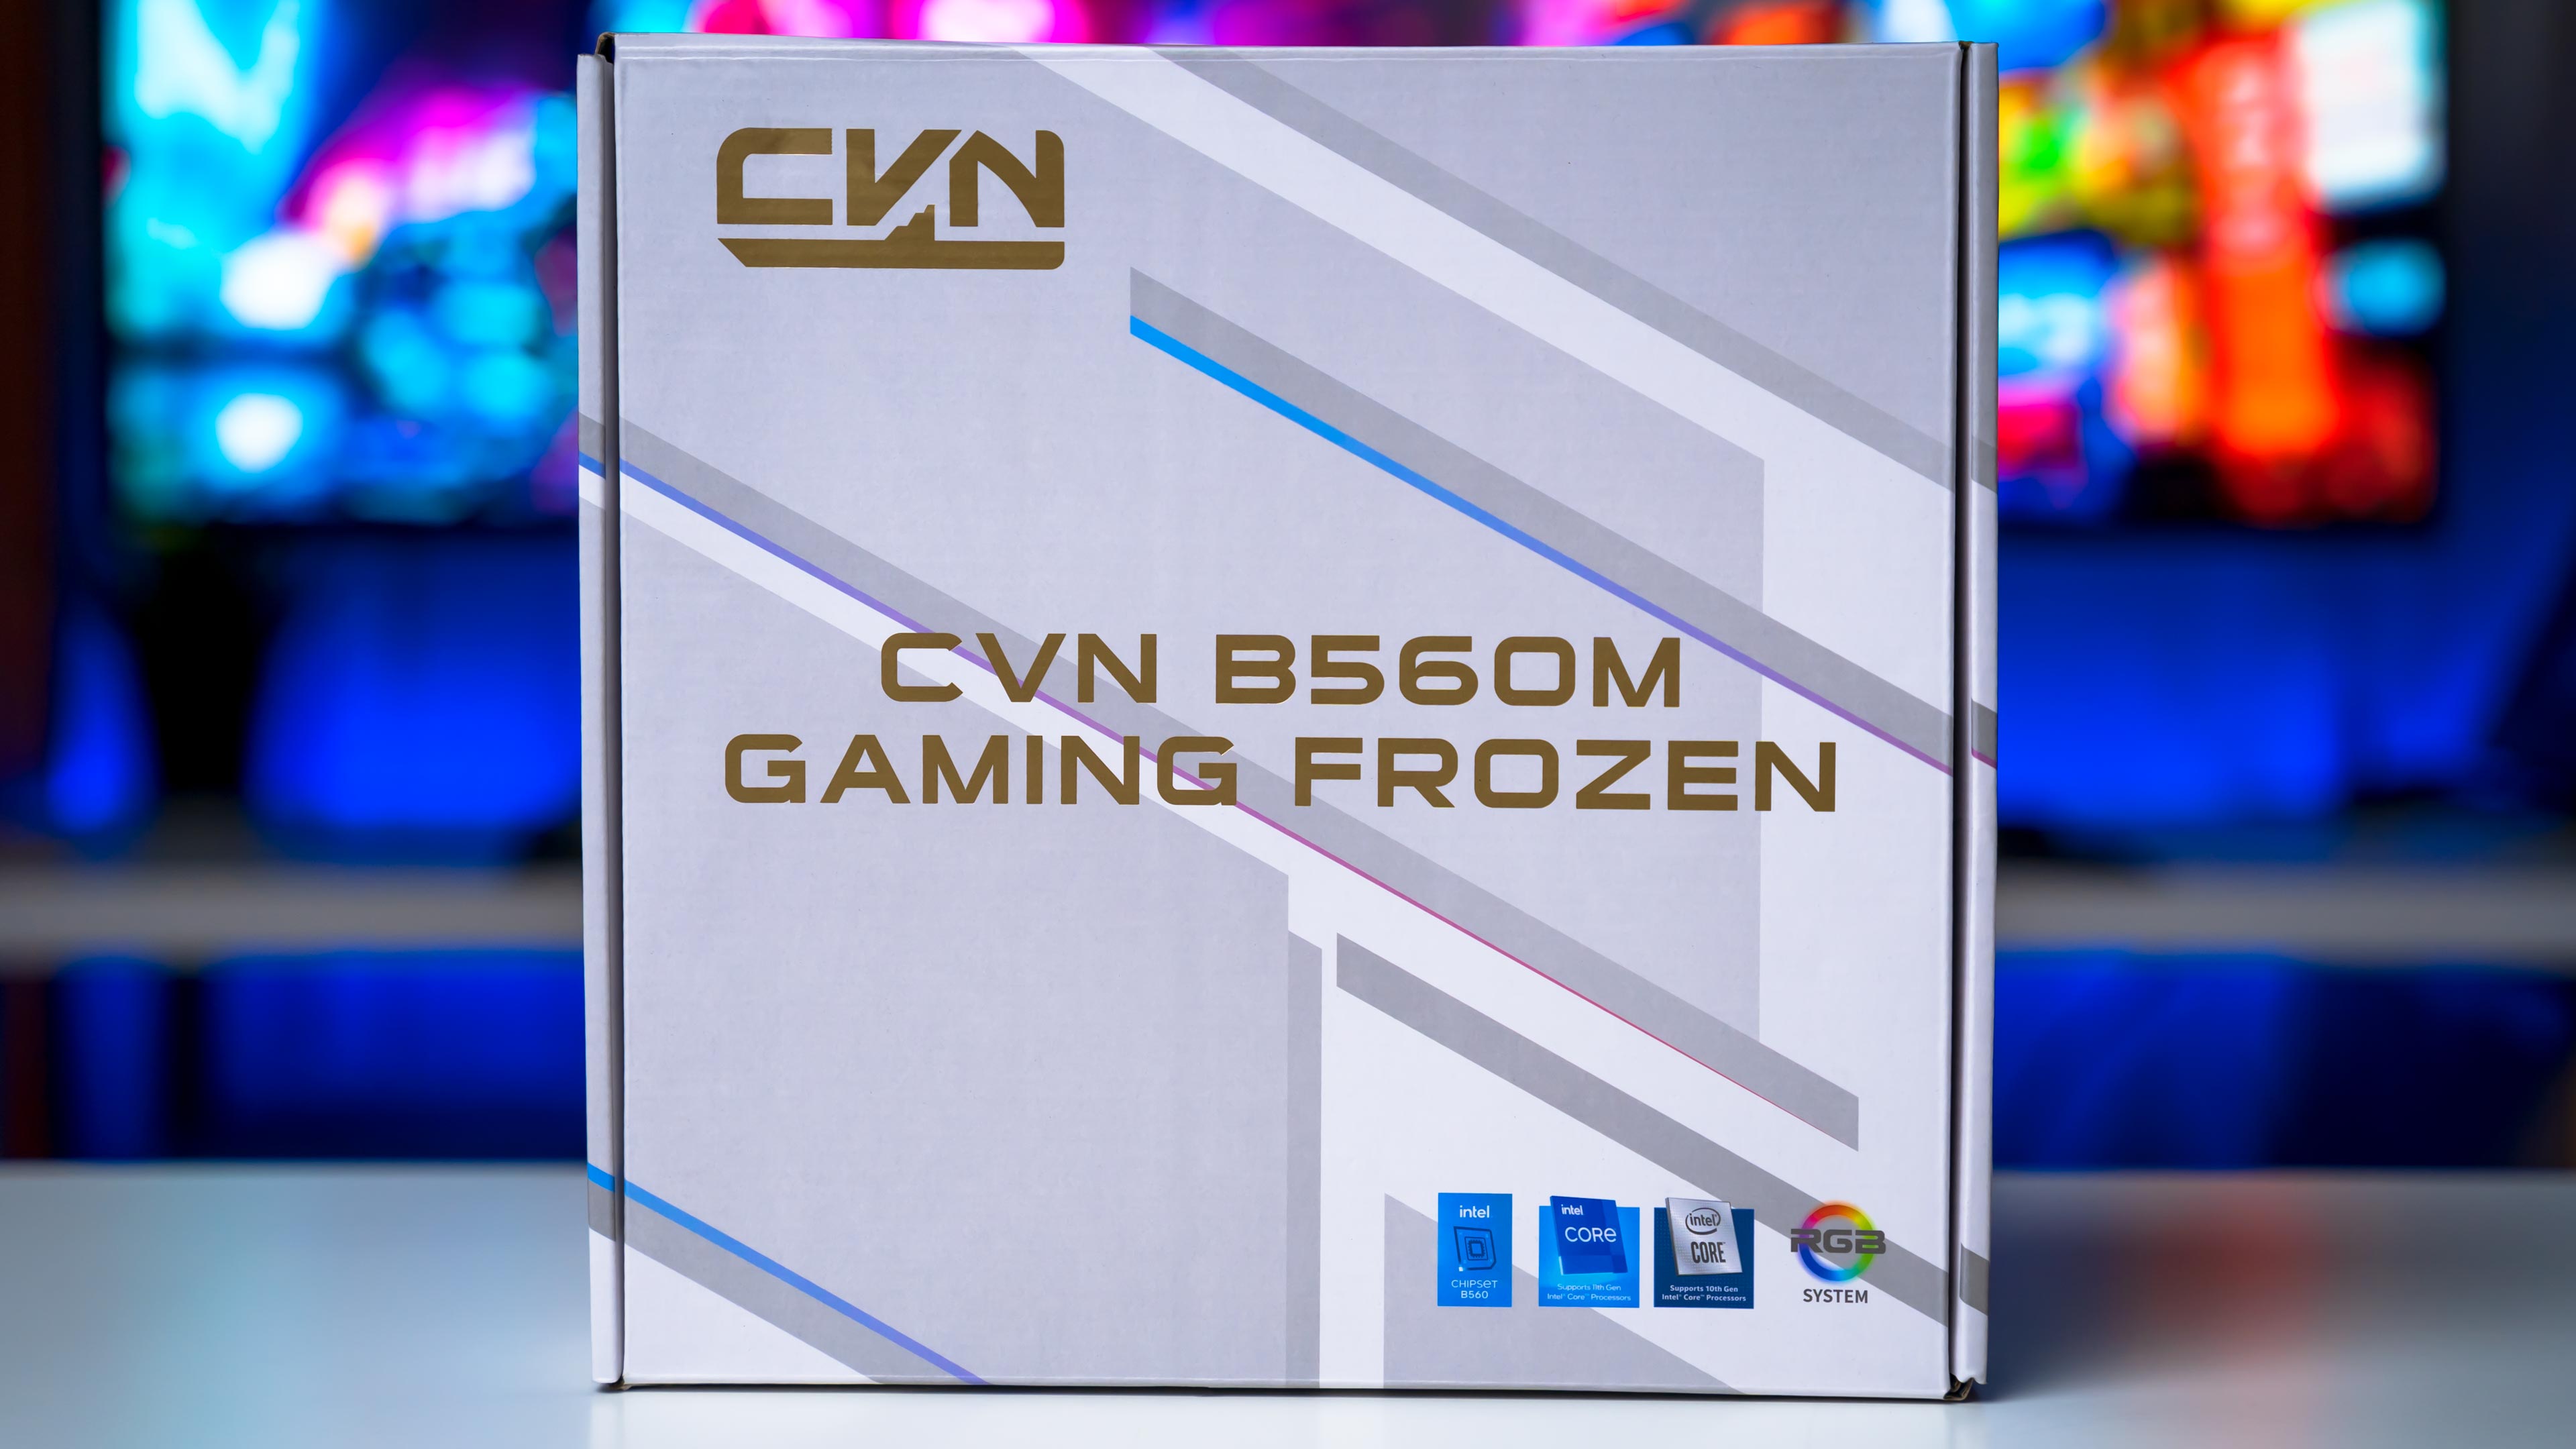 Colorful B560M CVN Gaming Frozen Box (1)